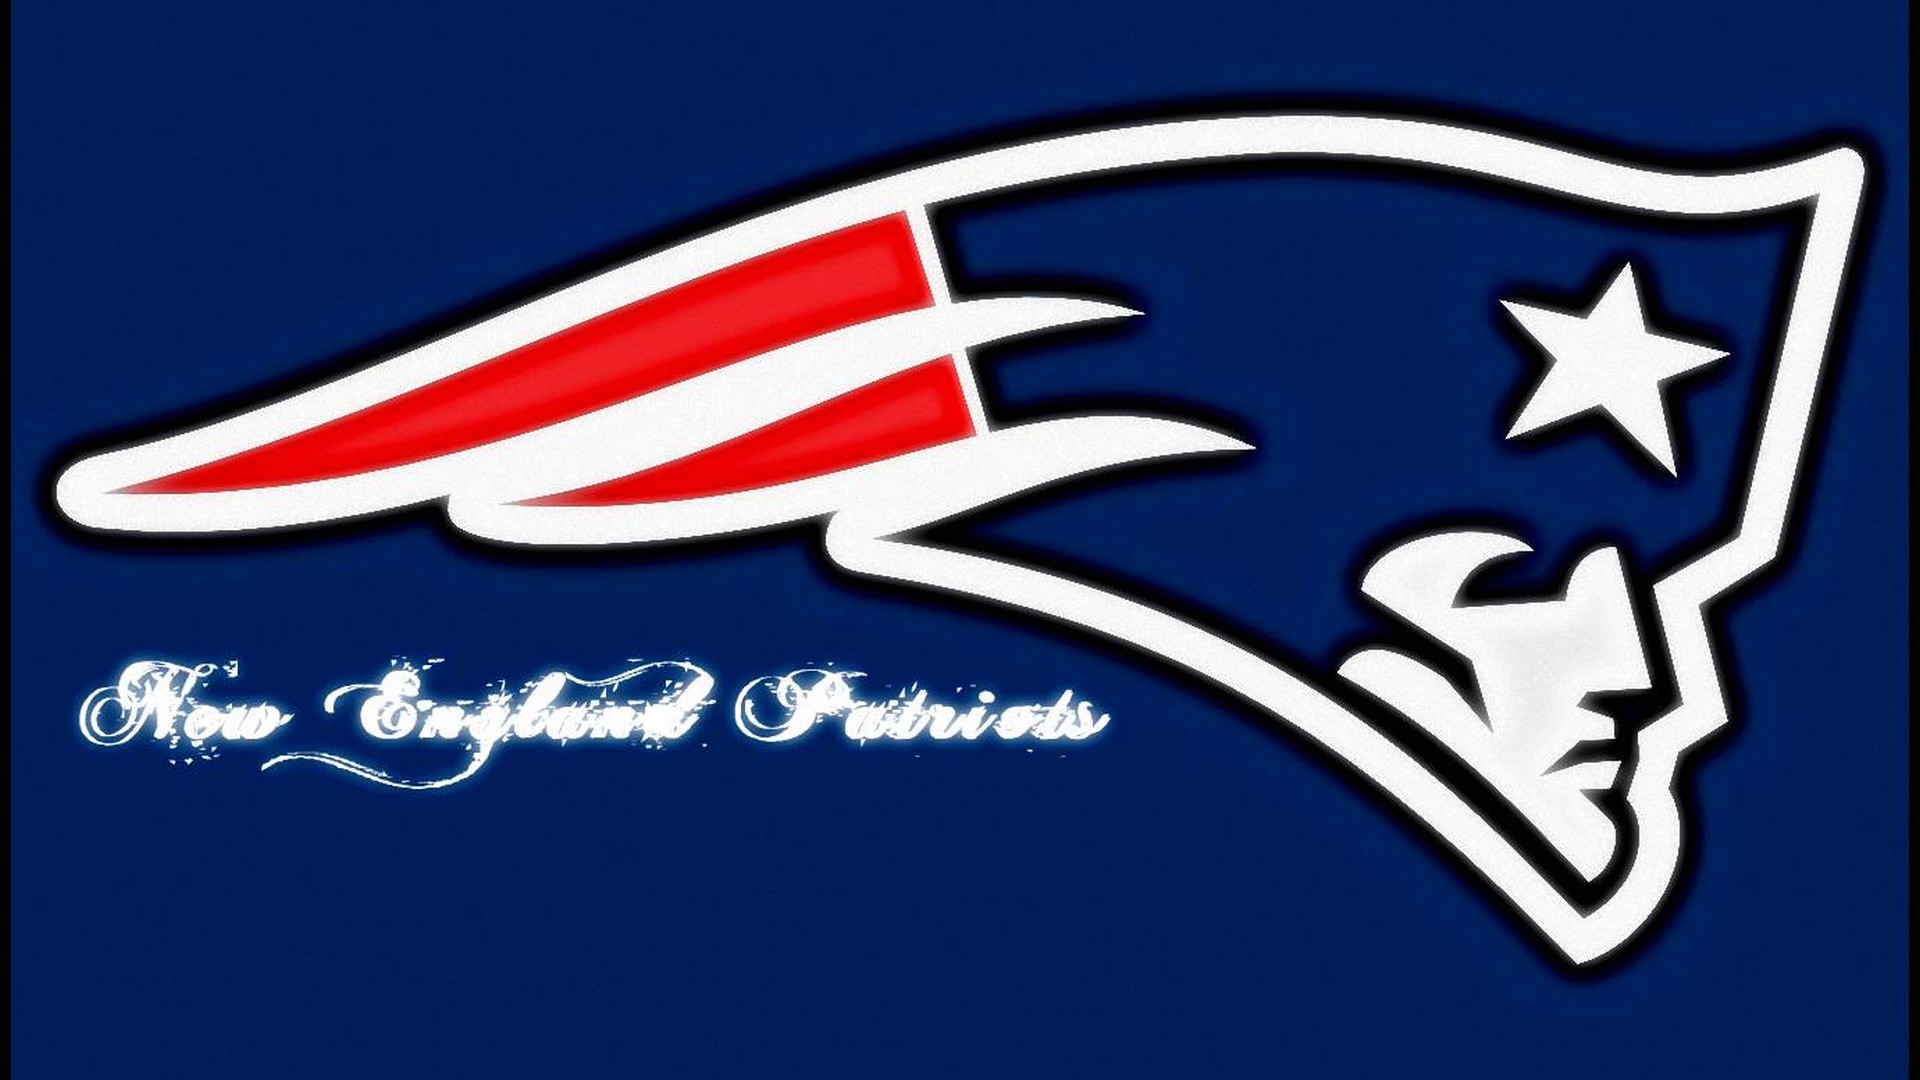 New England Patriots Desktop Wallpaper With Resolution 1920X1080 pixel. You can make this wallpaper for your Mac or Windows Desktop Background, iPhone, Android or Tablet and another Smartphone device for free